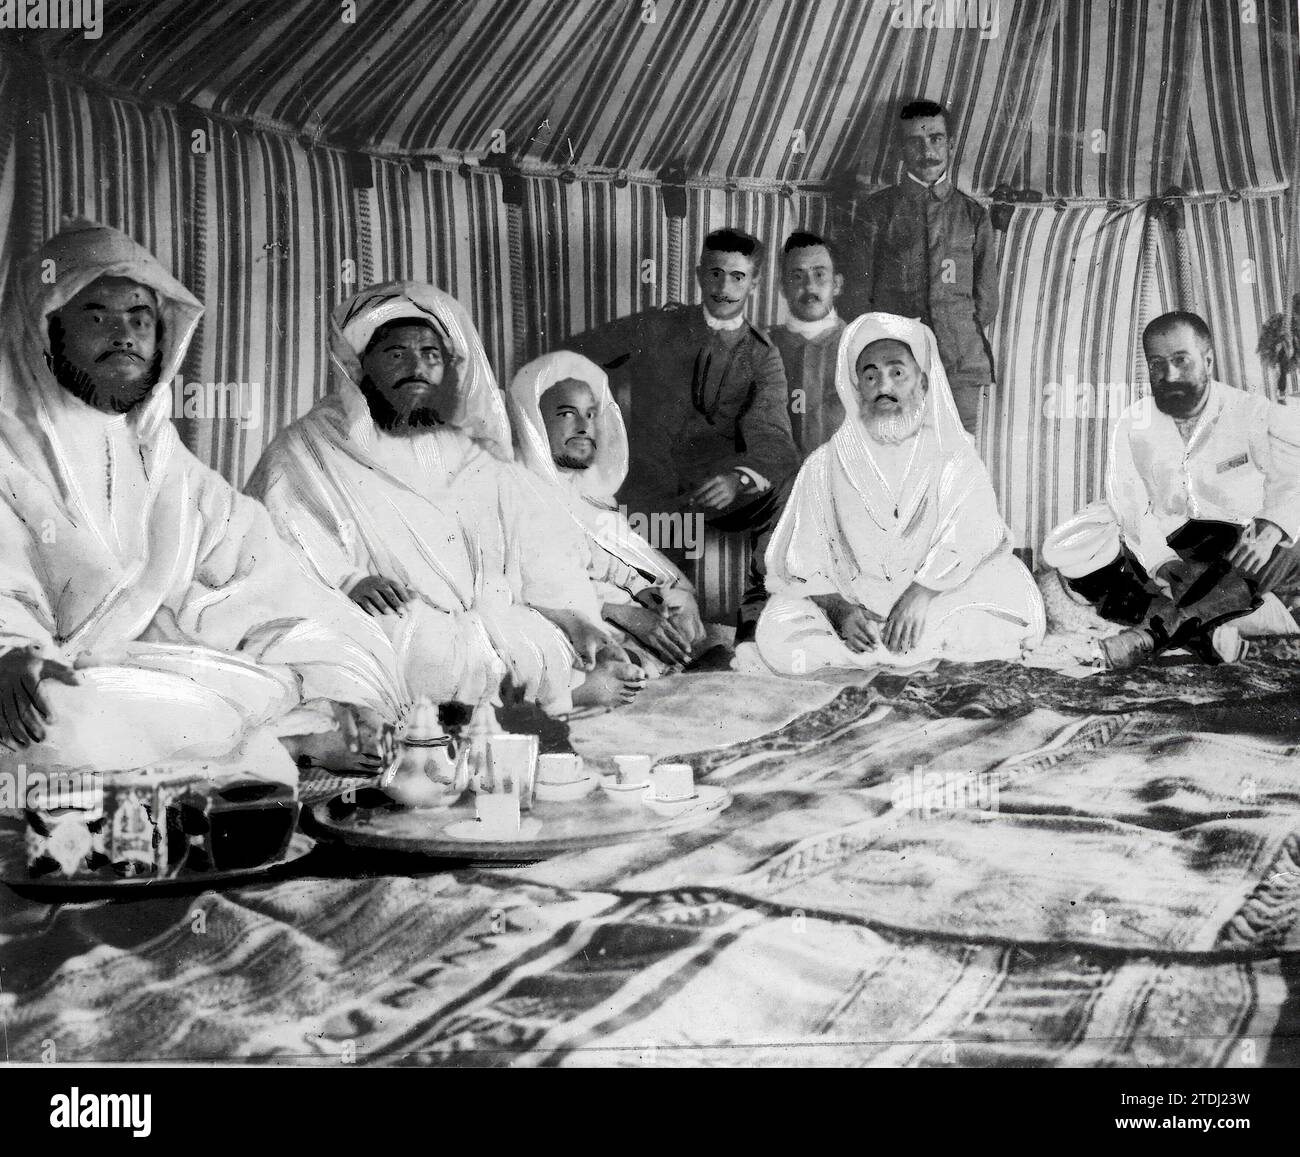 07/31/1907. Tetouan. In the tent of the Moroccan general Bushta bel Bagdadi, head of the Forces Operating against Raisuli. From left to right, seated, the administrator of the Mehalla, General Bagdadi, the Khalifa of Guebbas, Minister of War, El-Lebbady, discharge from Tetouan, D. José González Cárceller, interpreter of the Spanish consulate of Tetouan. Standing, second, the Officers of the Spanish Regiment of the Seraglio, Messrs. Borbón, Más and Adelantado. Photo: López Ferrer -Approximate date. Credit: Album / Archivo ABC Stock Photo